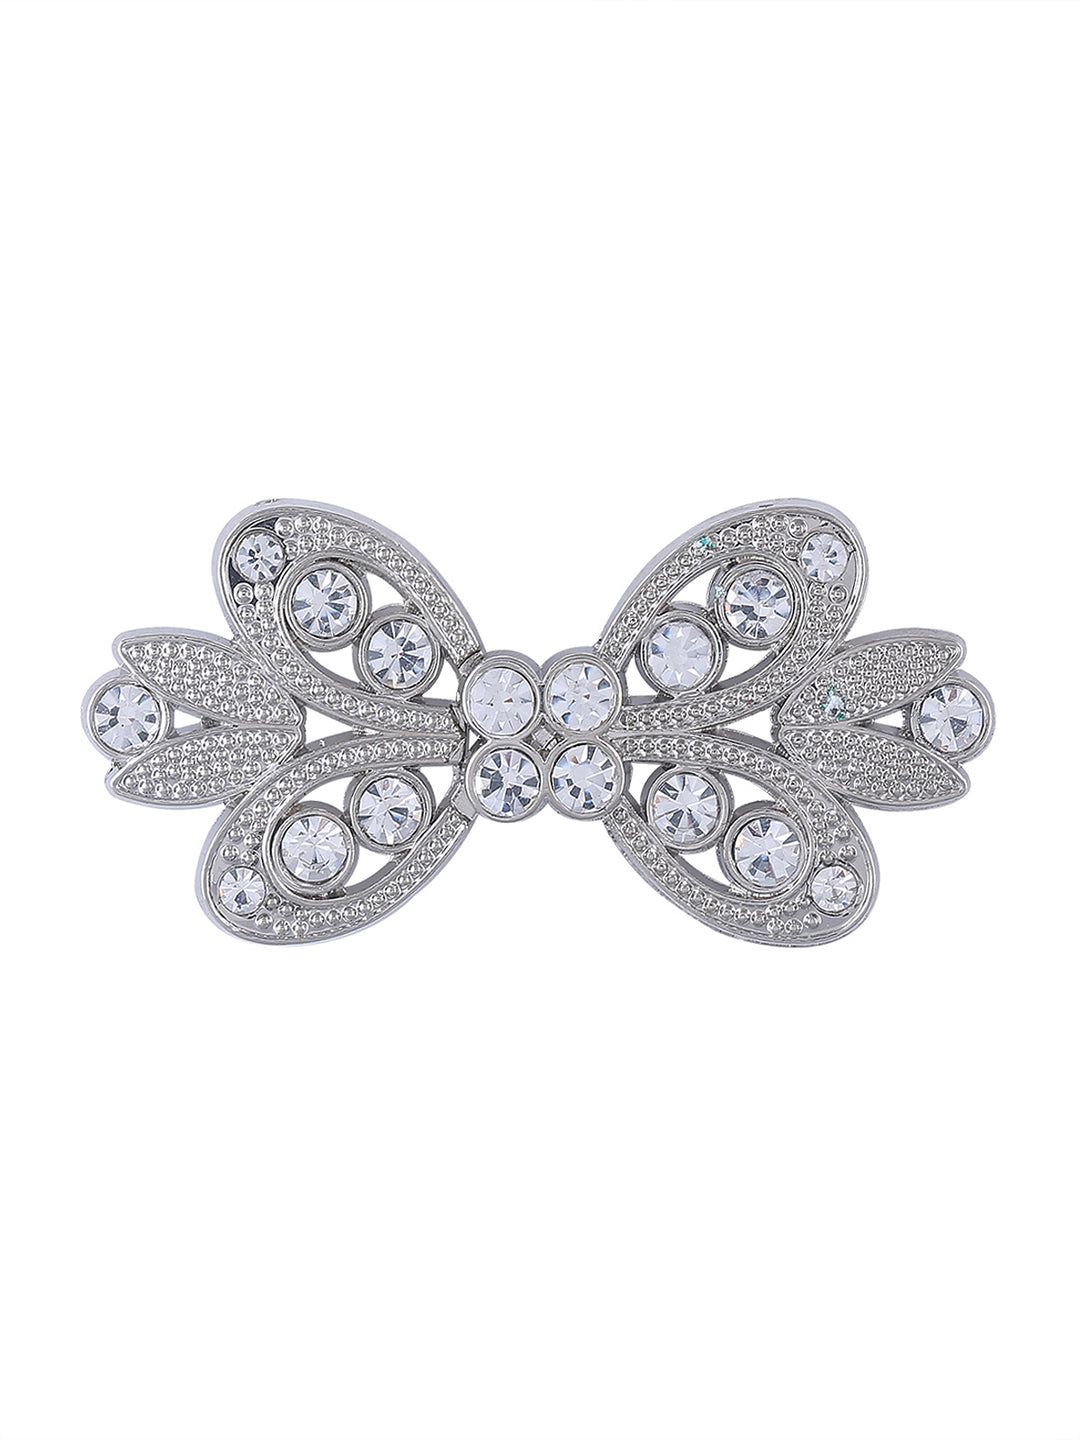 Shiny Silver Crystal Closure Clasp Buckle